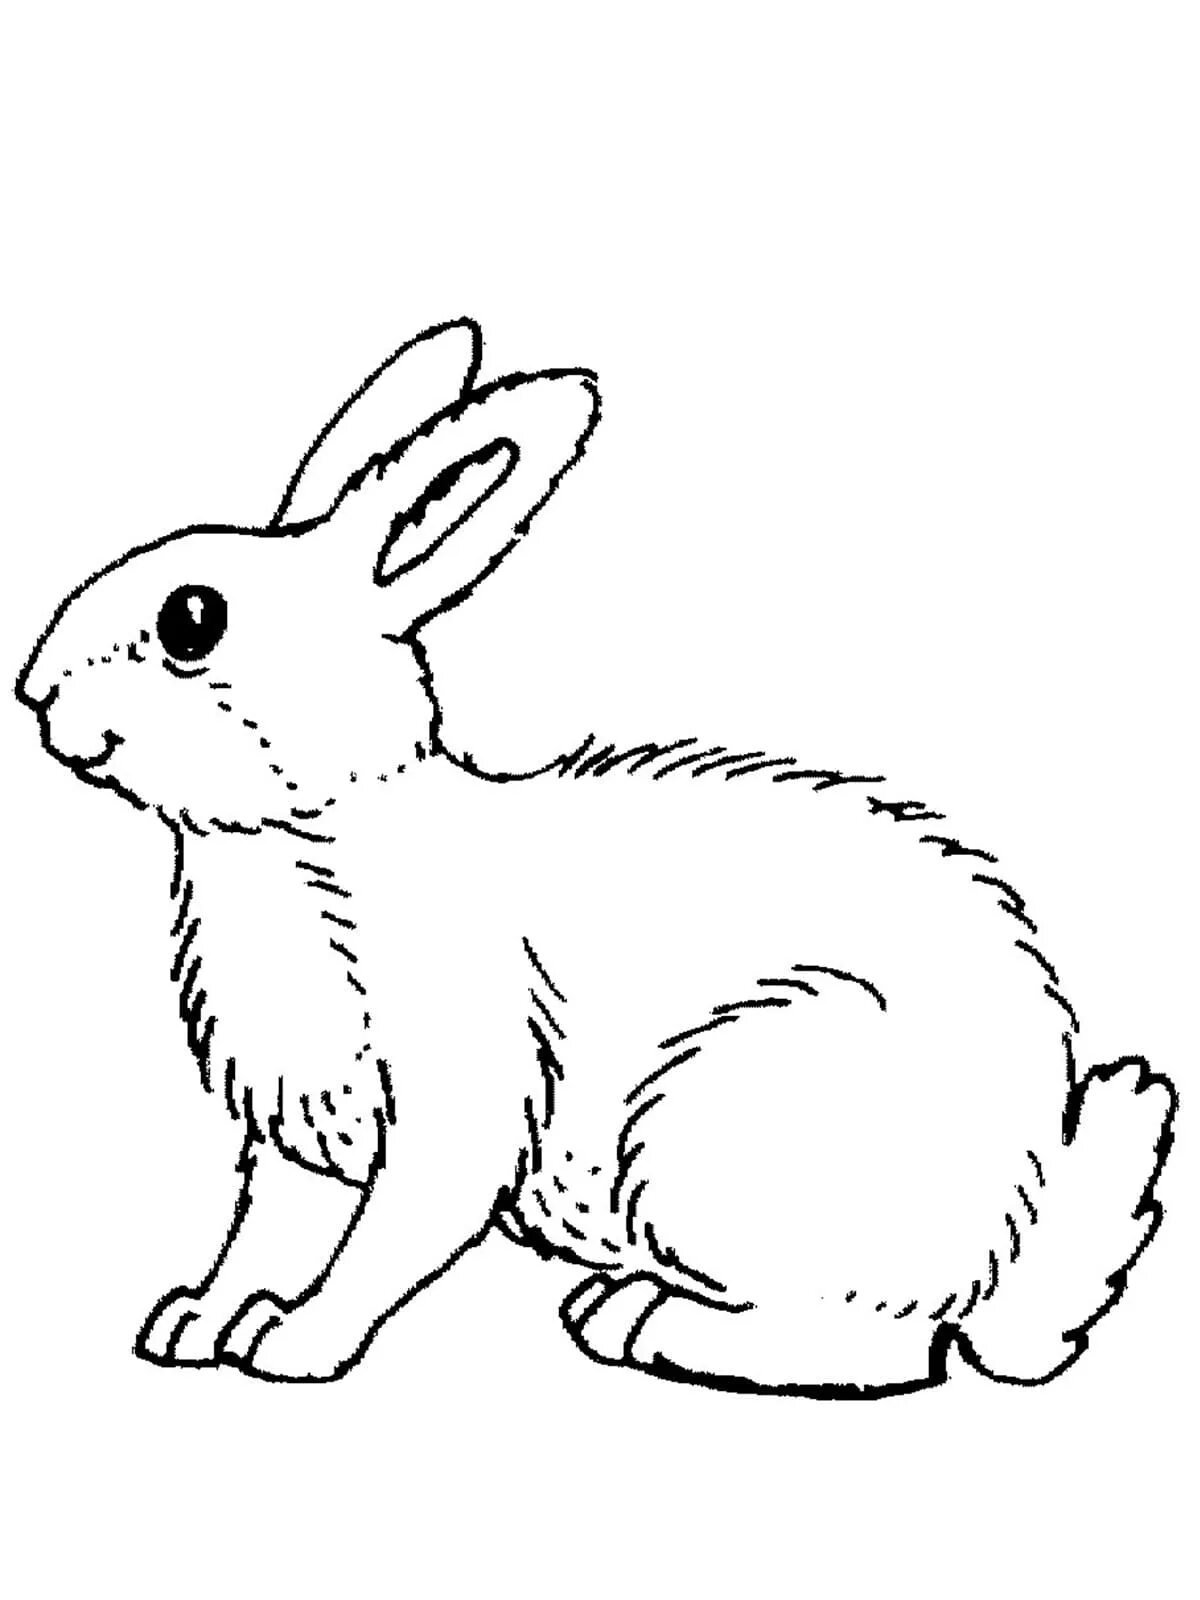 Witty animal coloring pages for kids